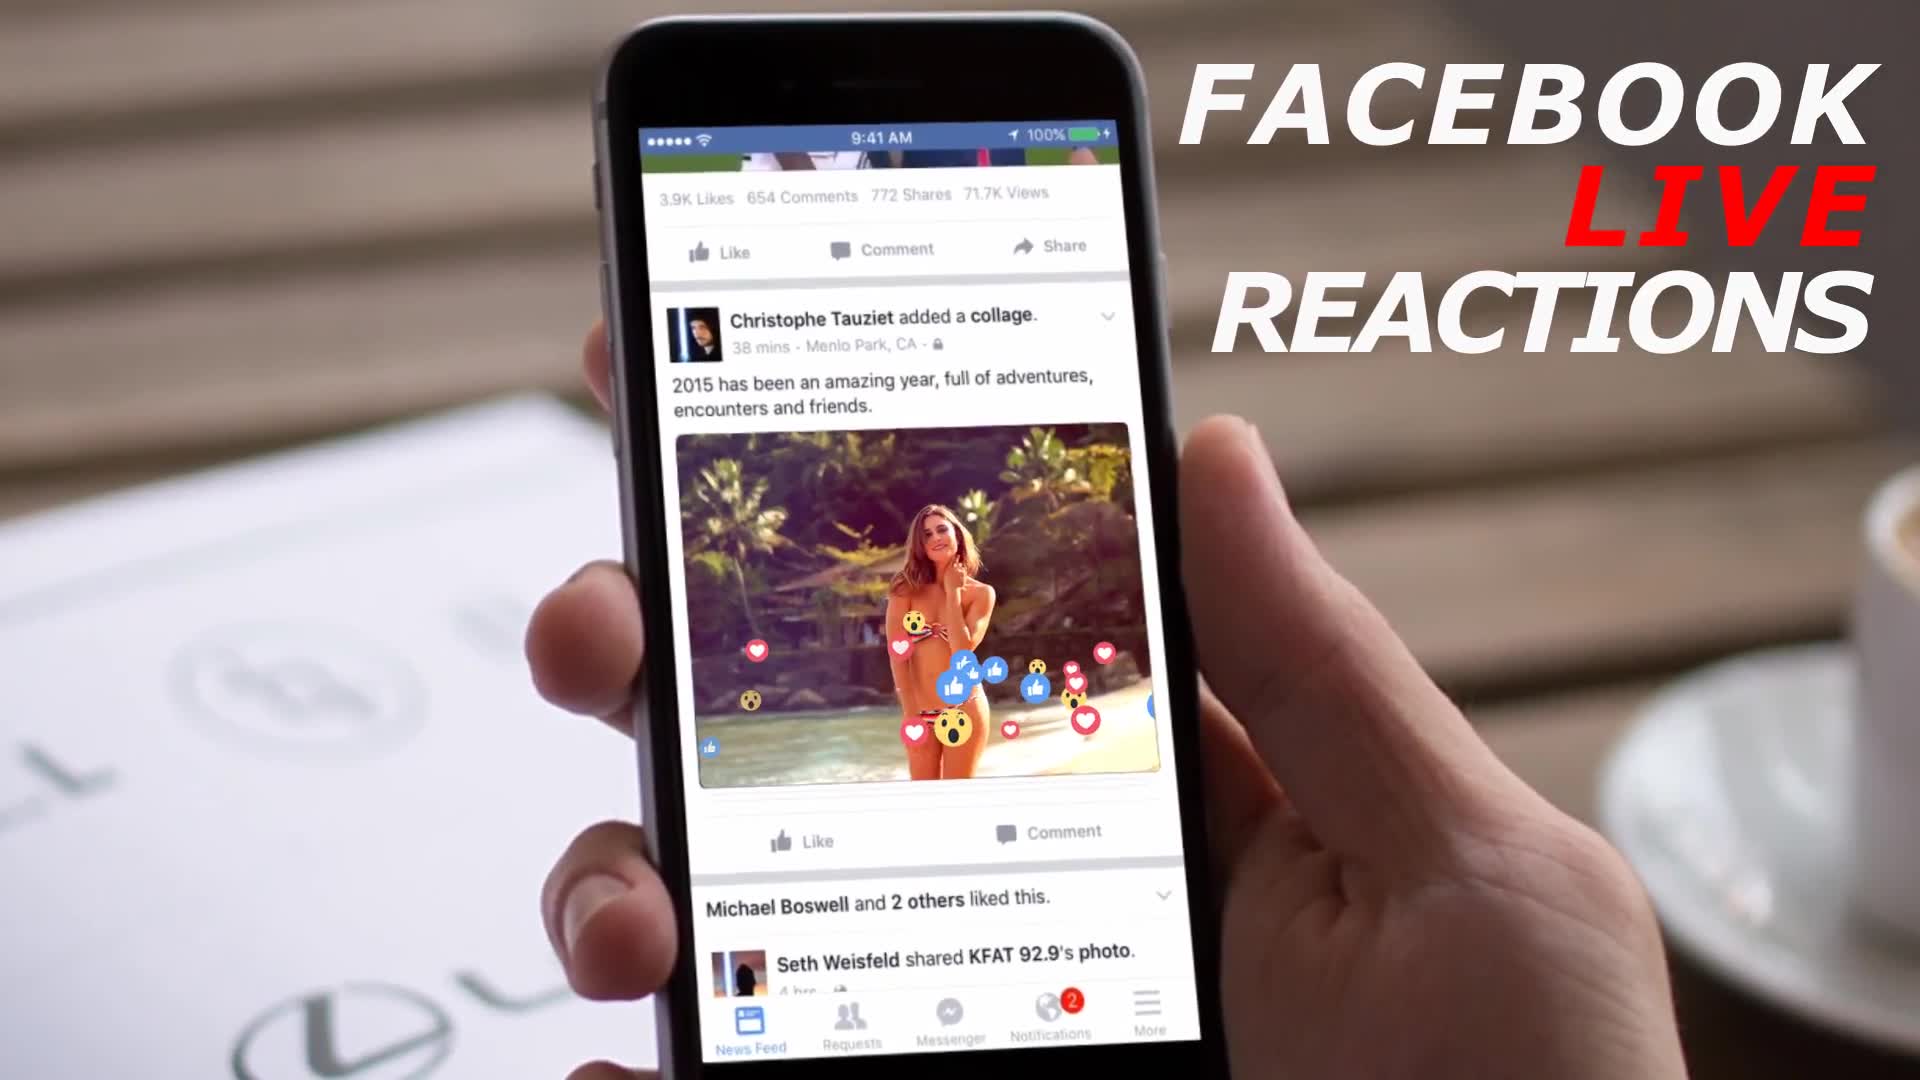 Facebook Live Reactions Builder - Download Videohive 21046656